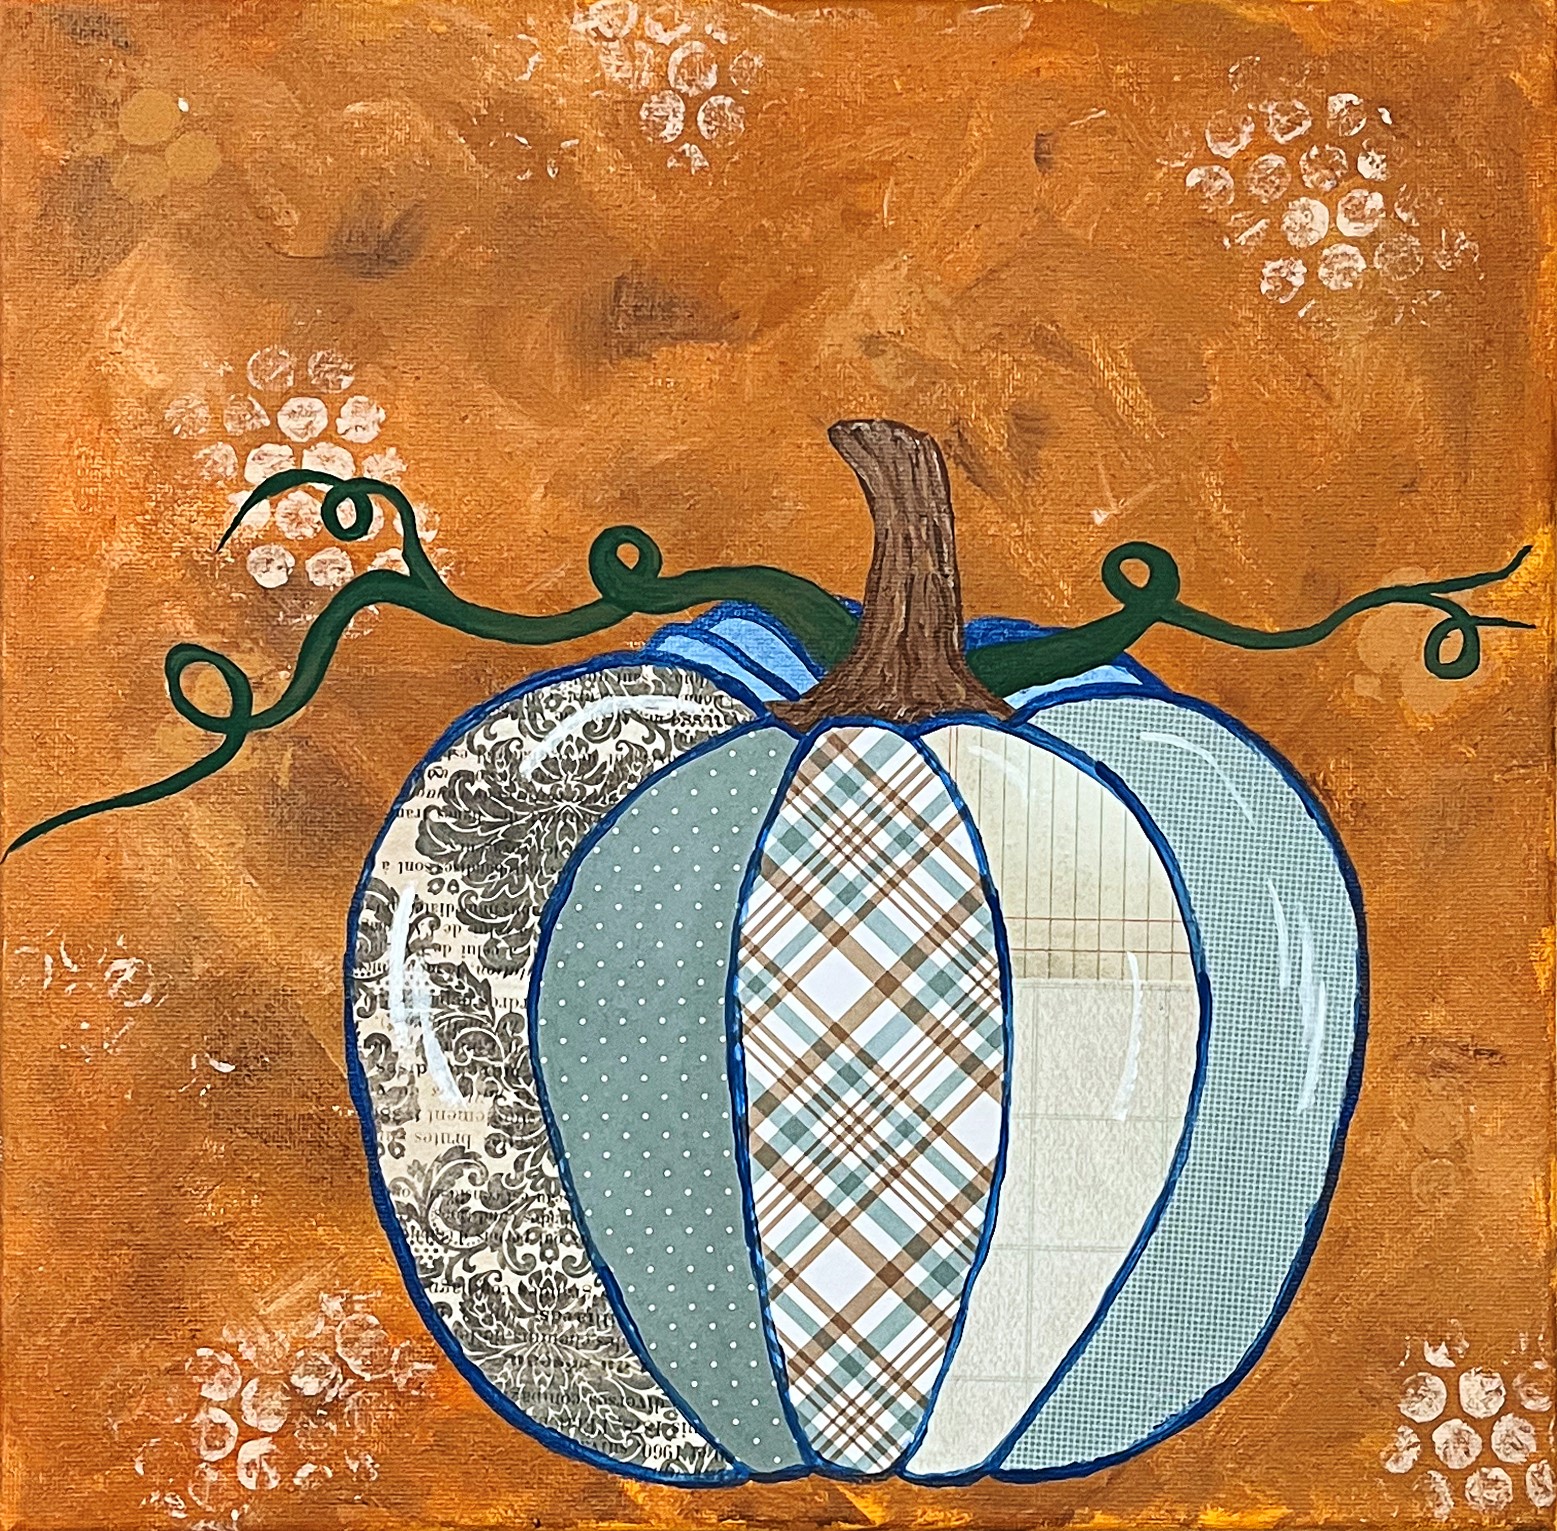 Product Image for Paint and Sip! Wednesday Oct. 12th, Pumpkin